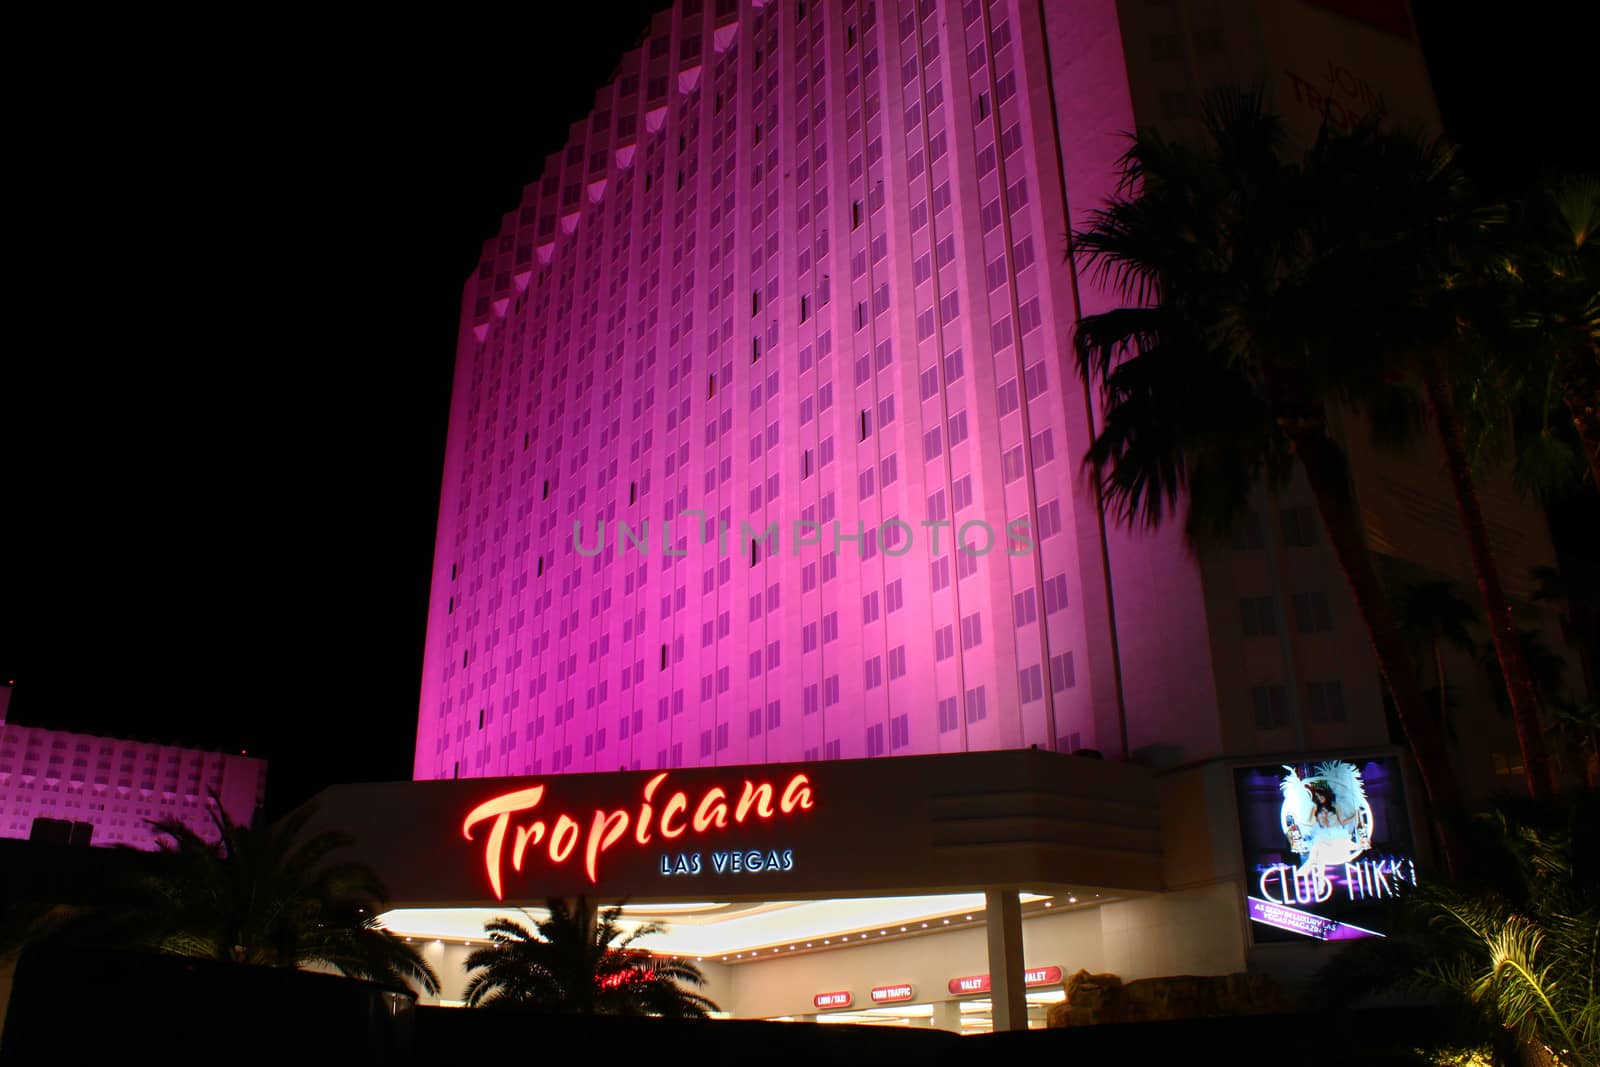 Las Vegas, USA - October 29, 2011: The Tropicana Las Vegas Hotel and Casino is located on the famous Las Vegas Strip in Nevada.  It is one of the oldest hotels on the Strip, being opened in 1957.